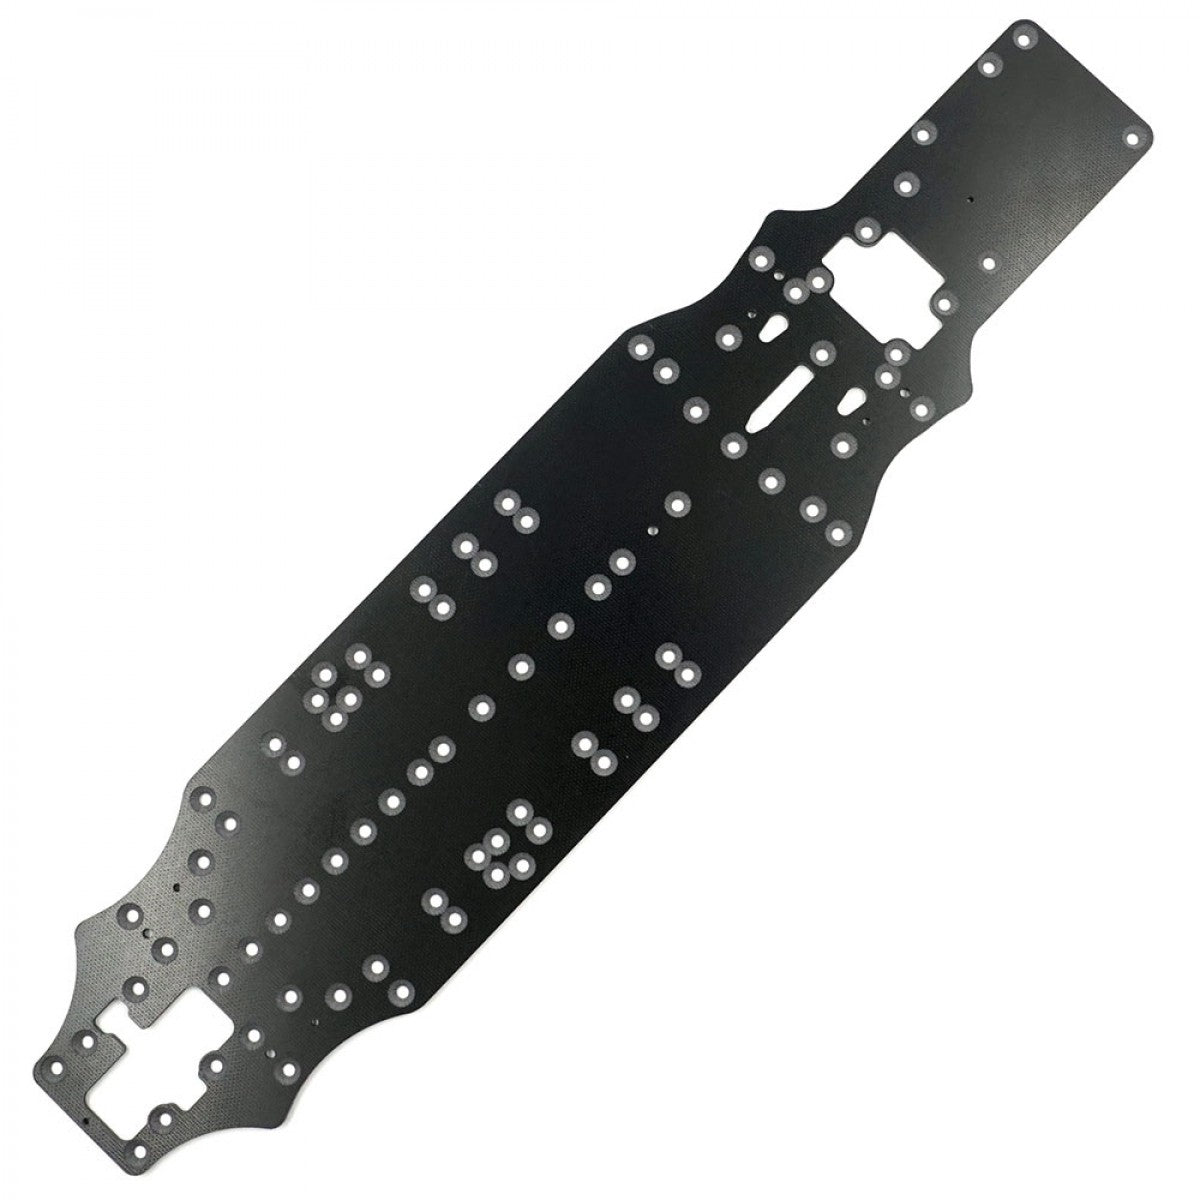 Xpress XP-10422 FT1S FRP 2.5mm Bottom Chassis Plate